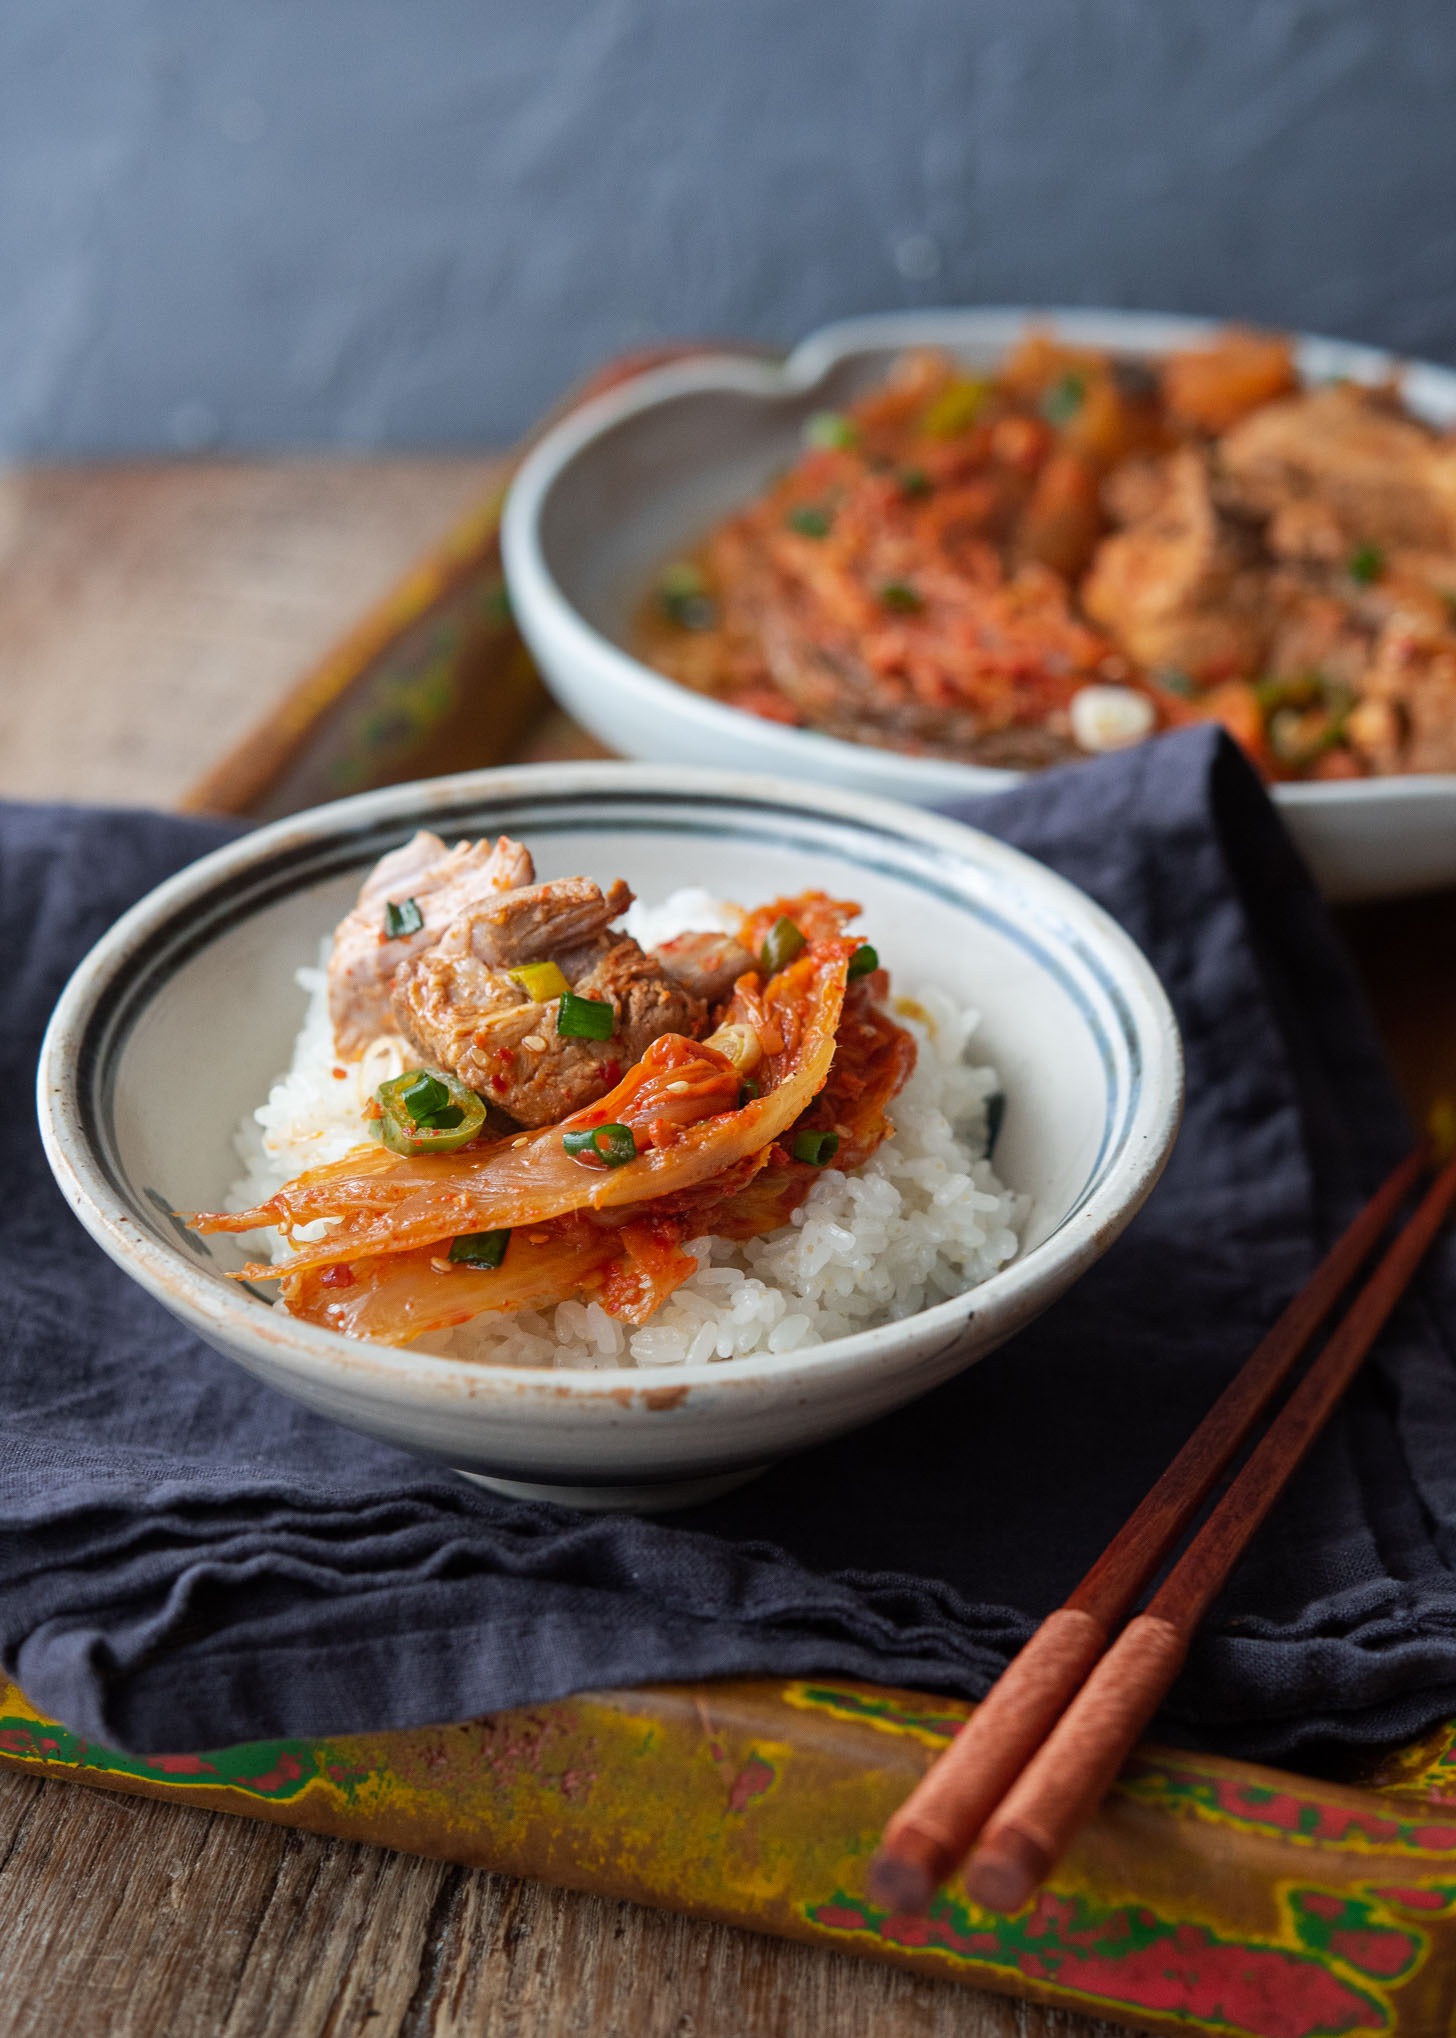 A bowl of rice is topped with pieces of kimchi jjim and a pork rib.